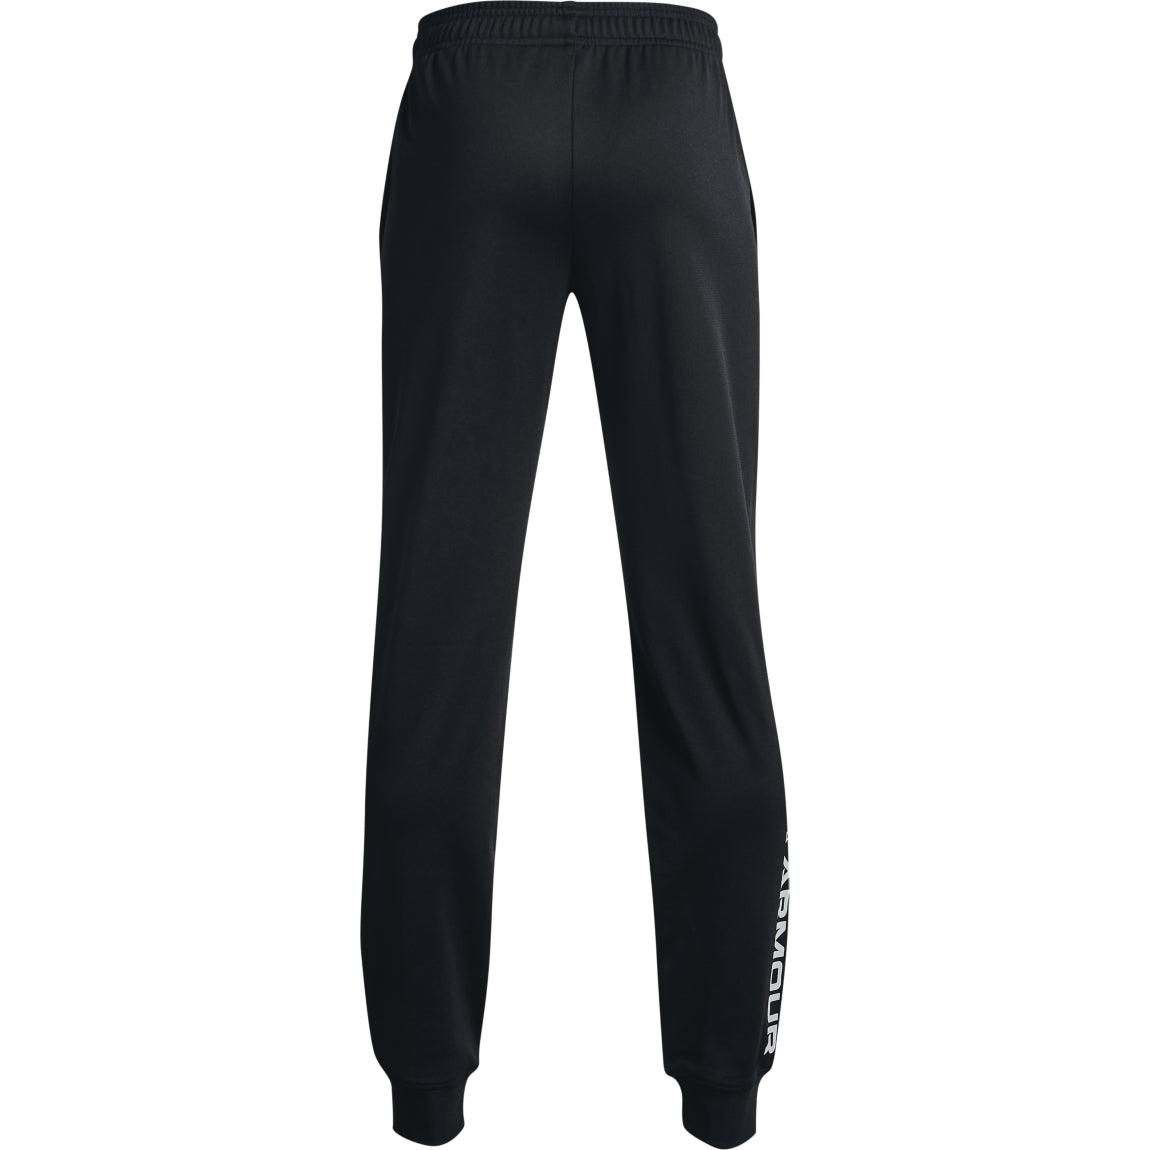 Under Armour Brawler 2.0 Tapered Pants - Boys - Sports Excellence